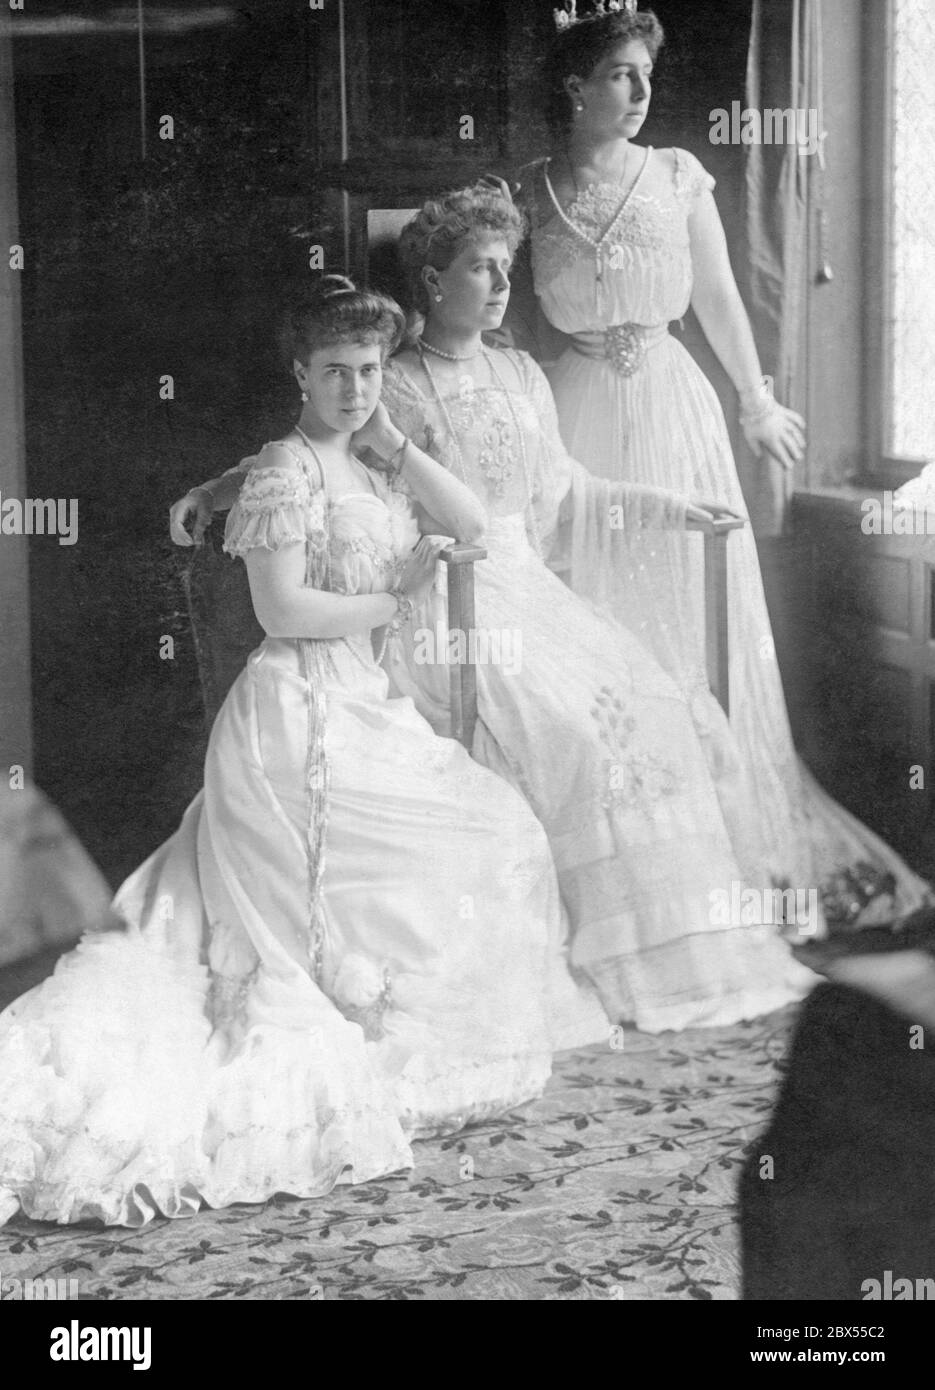 From left to right: Princess Beatrice, Crown Princess Marie of Romania and Grand Duchess Cyril. Undated photo. Stock Photo